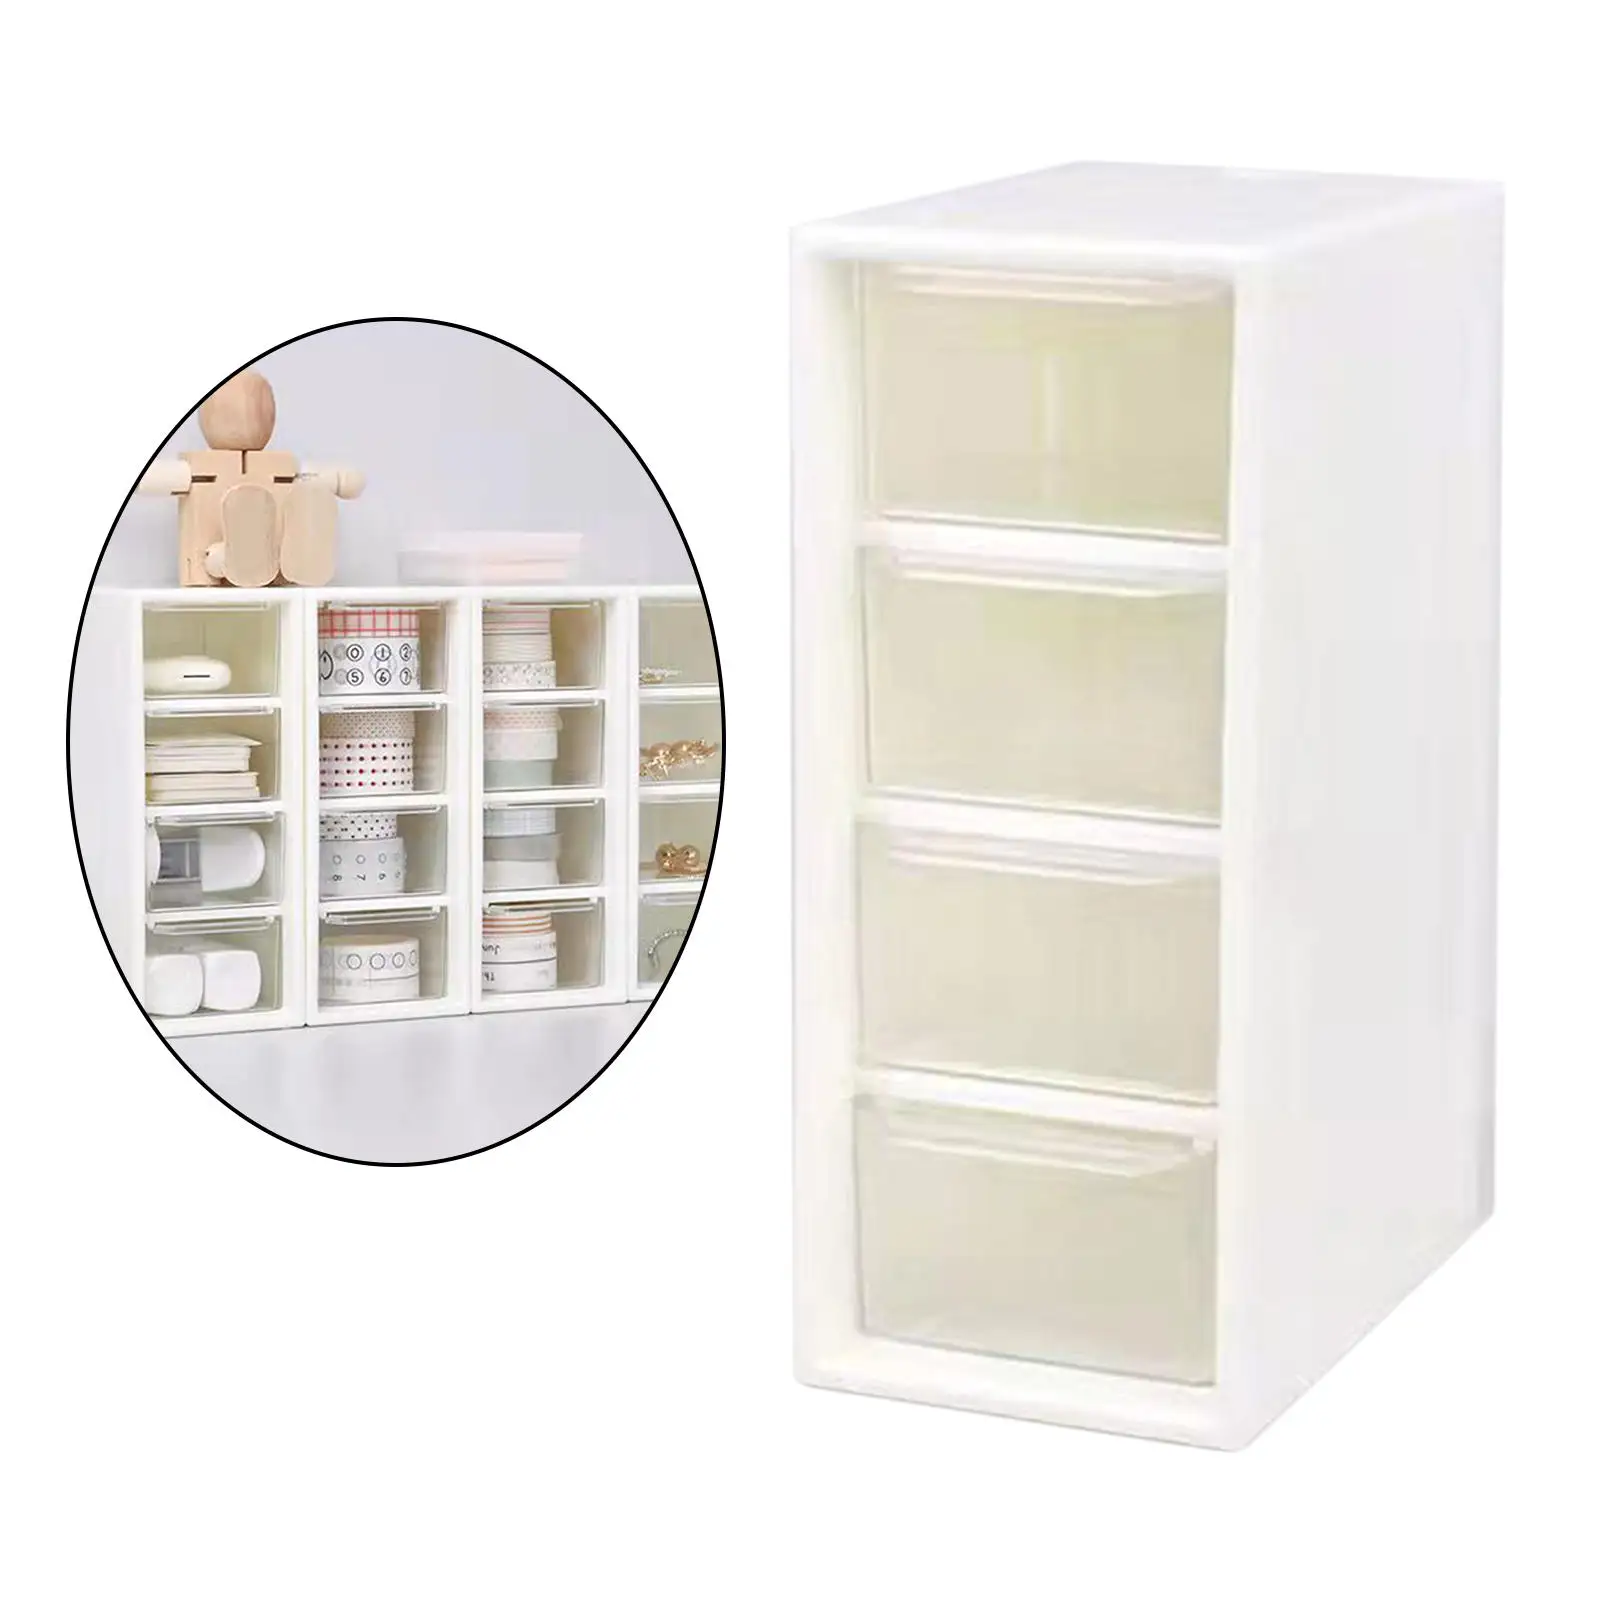 White Desktop Cosmetic Storage Box with 4 Drawer Units Container Case Small Organizer Box for Office Home Makeup 15.7x6.5x9.7cm